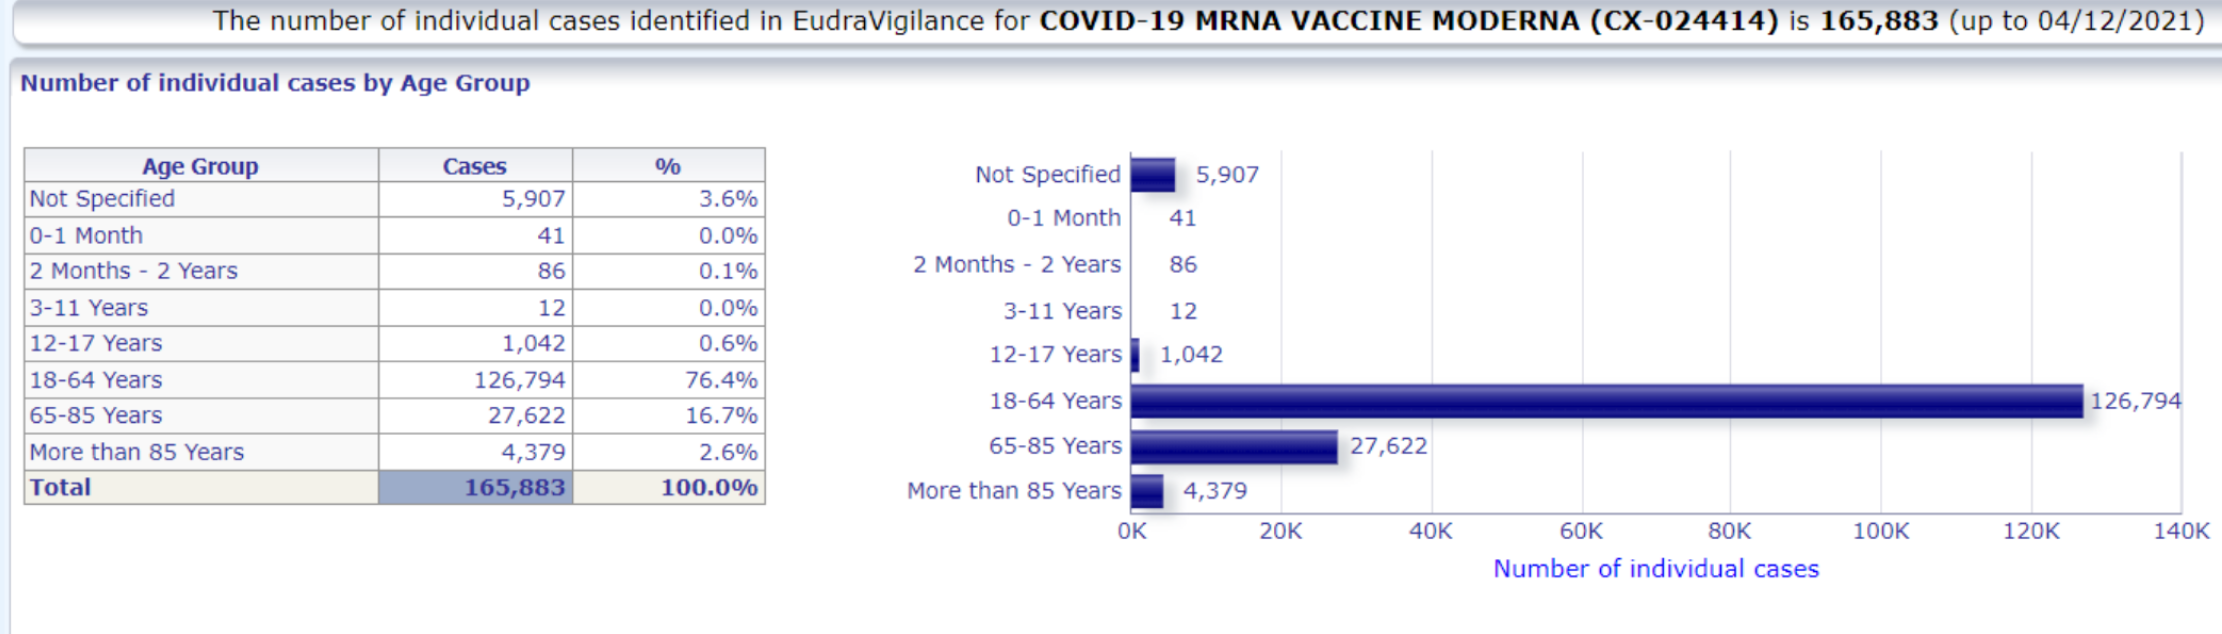 A chart and graph showing COVID vaccine reactions Moderna in Europe